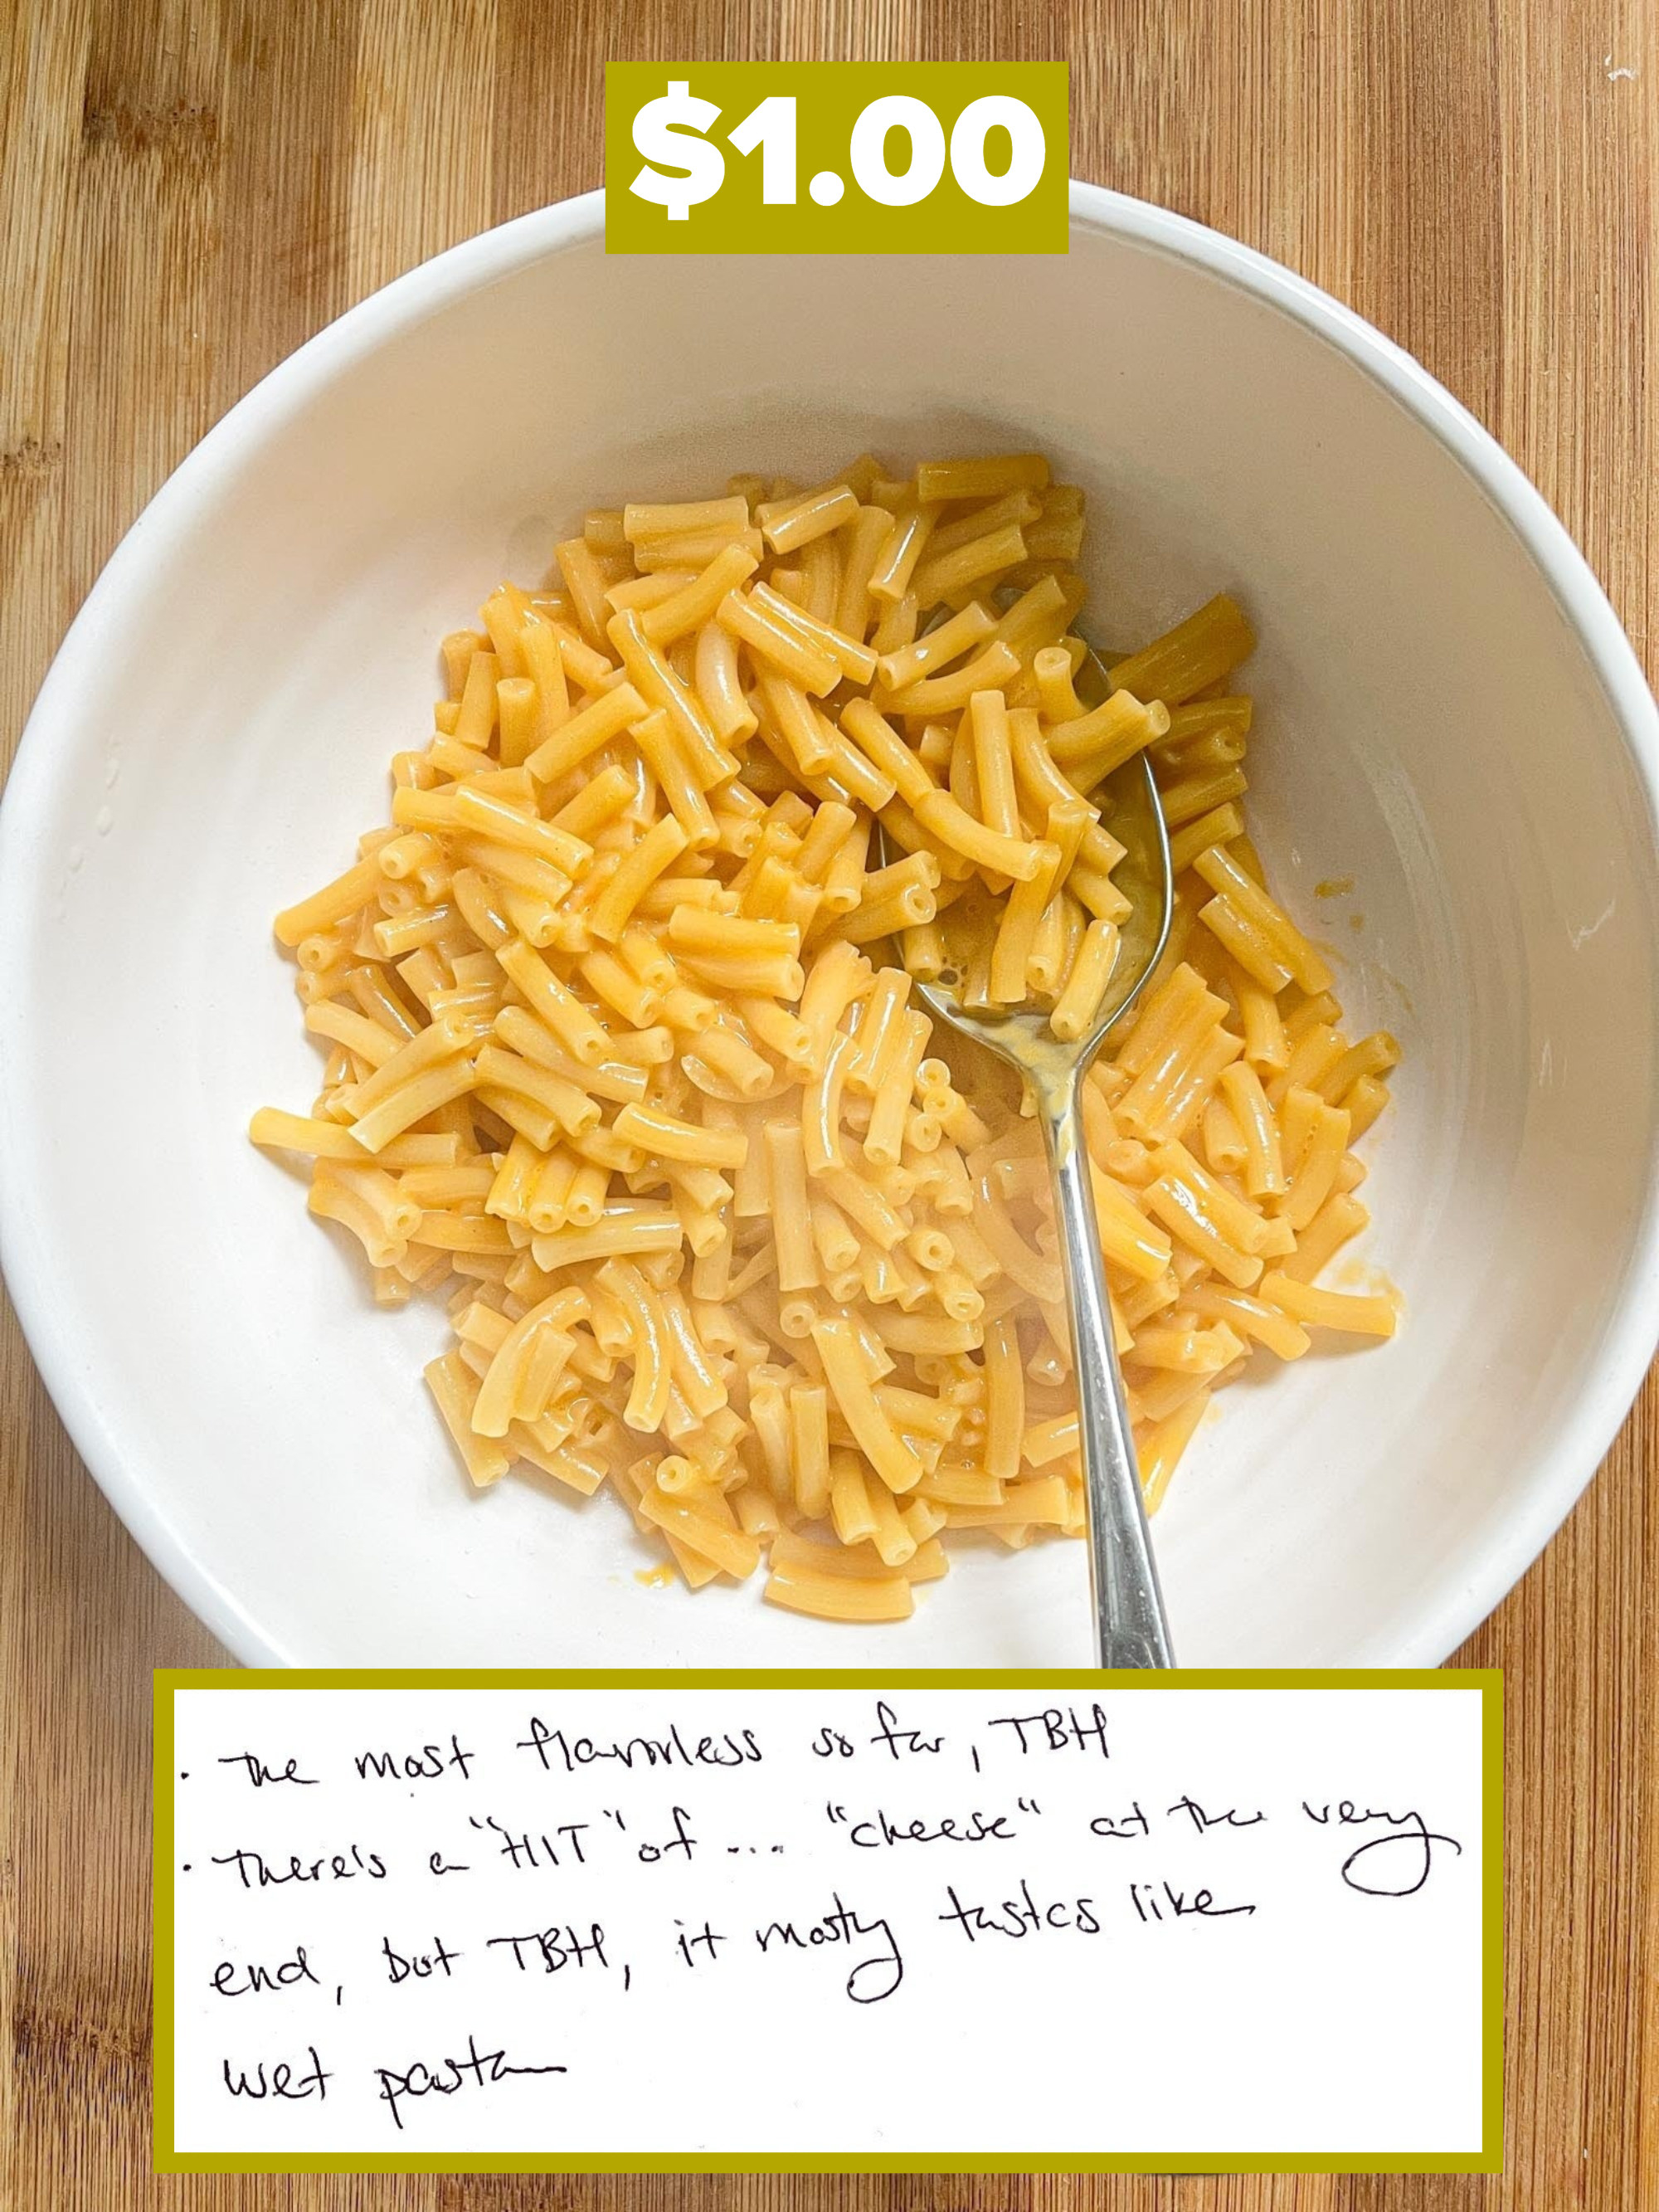 Cost: 1:00; author&#x27;s handwritten notes included at the bottom, including &quot;the most flavorless so far, TBH&quot; and &quot;it mostly tastes like wet pasta&quot;